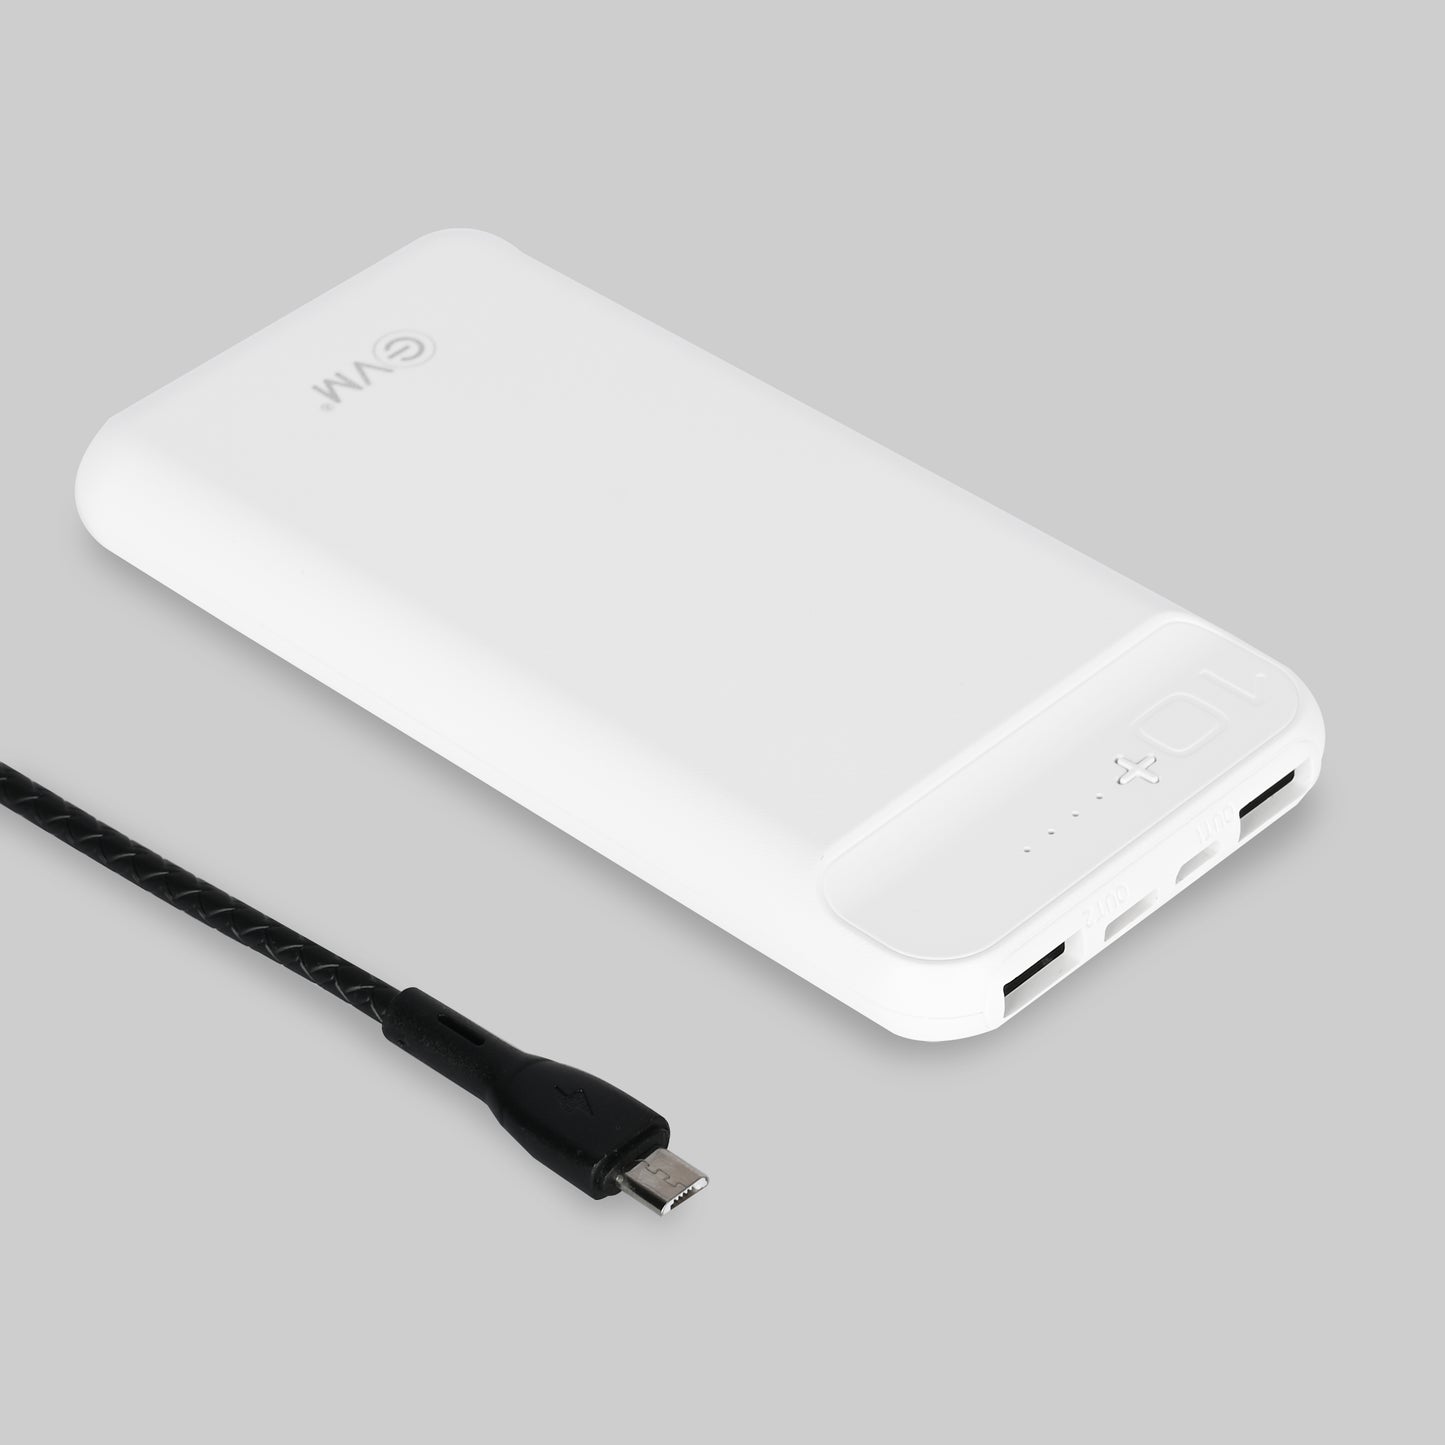 Personalized Black 10000mAh Power Bank - For Corporate Gifting, Event Gifting, Freebies, Promotions - P0109